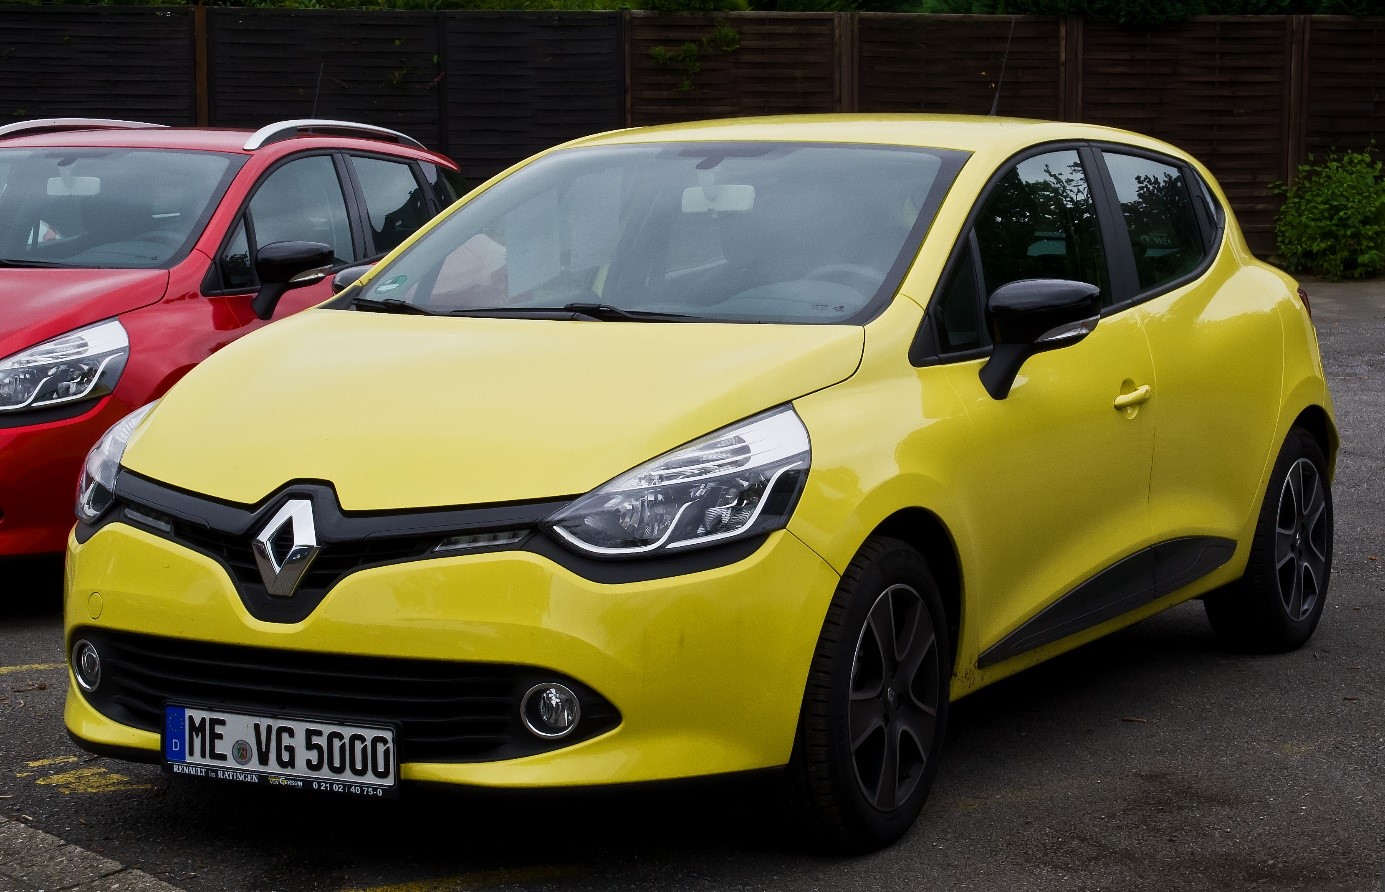 Części Renault Clio Części Renault Clio / Sklep iParts.pl